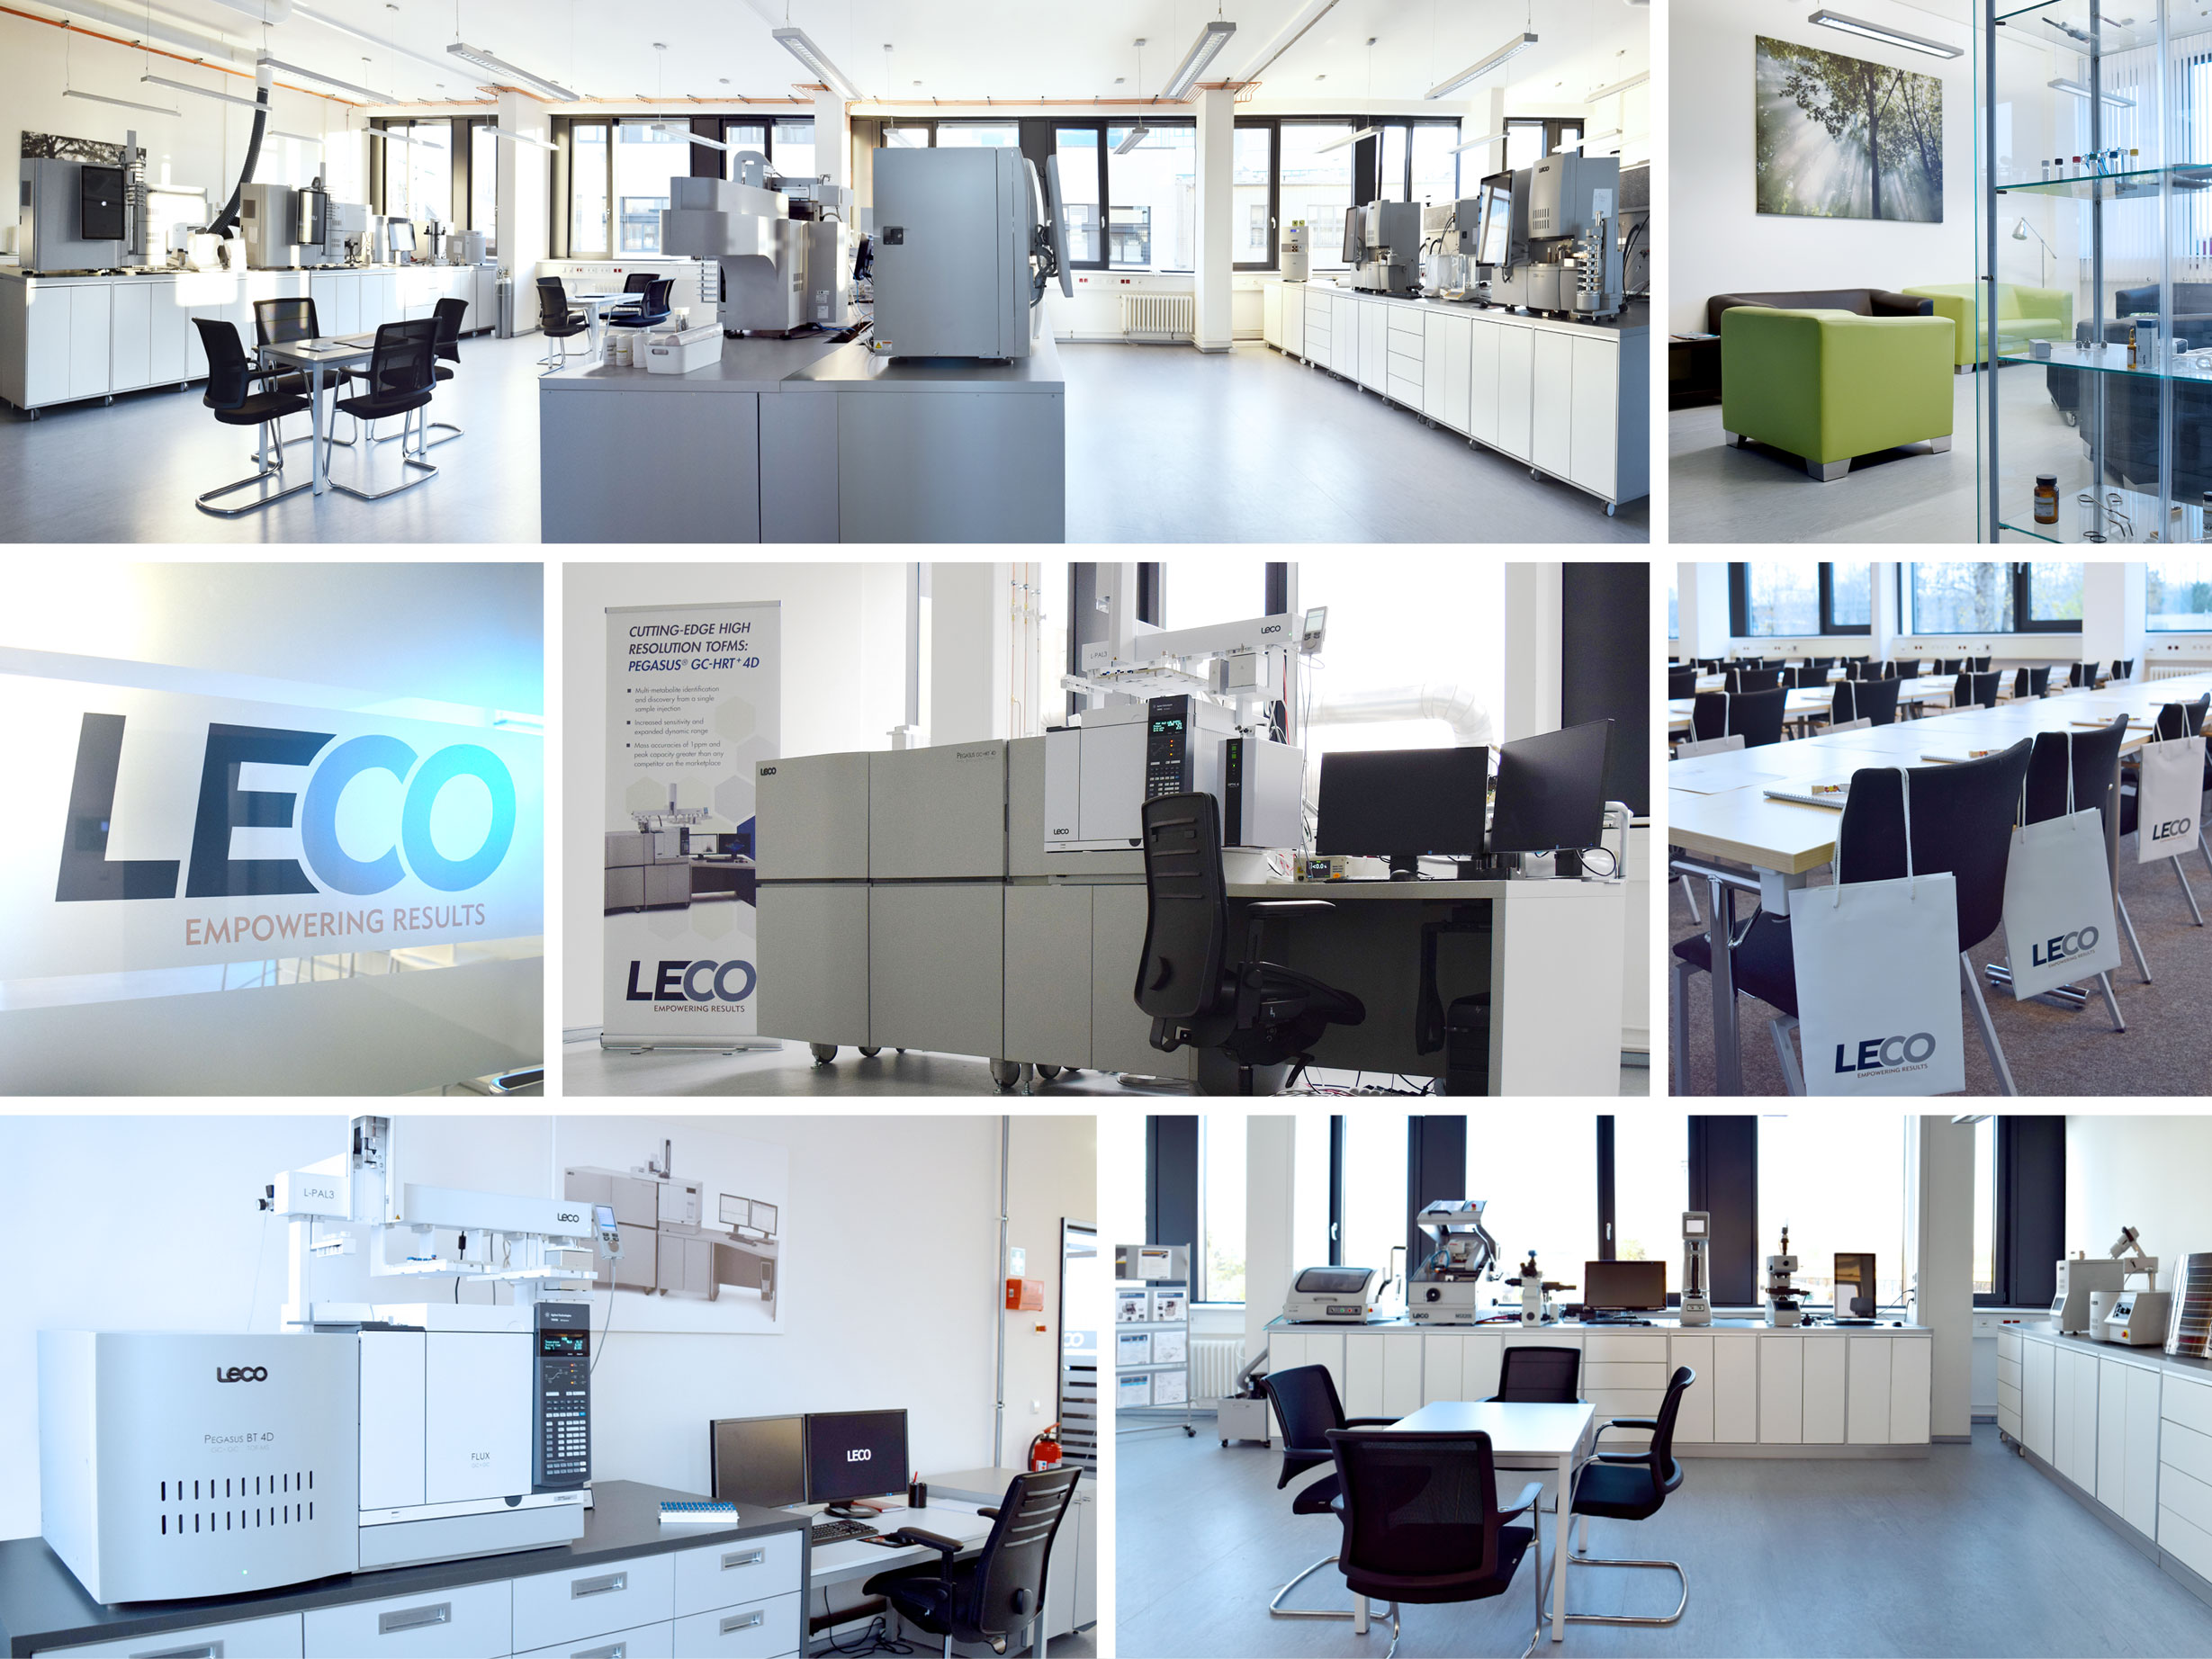 LECO European Application and Technology Center